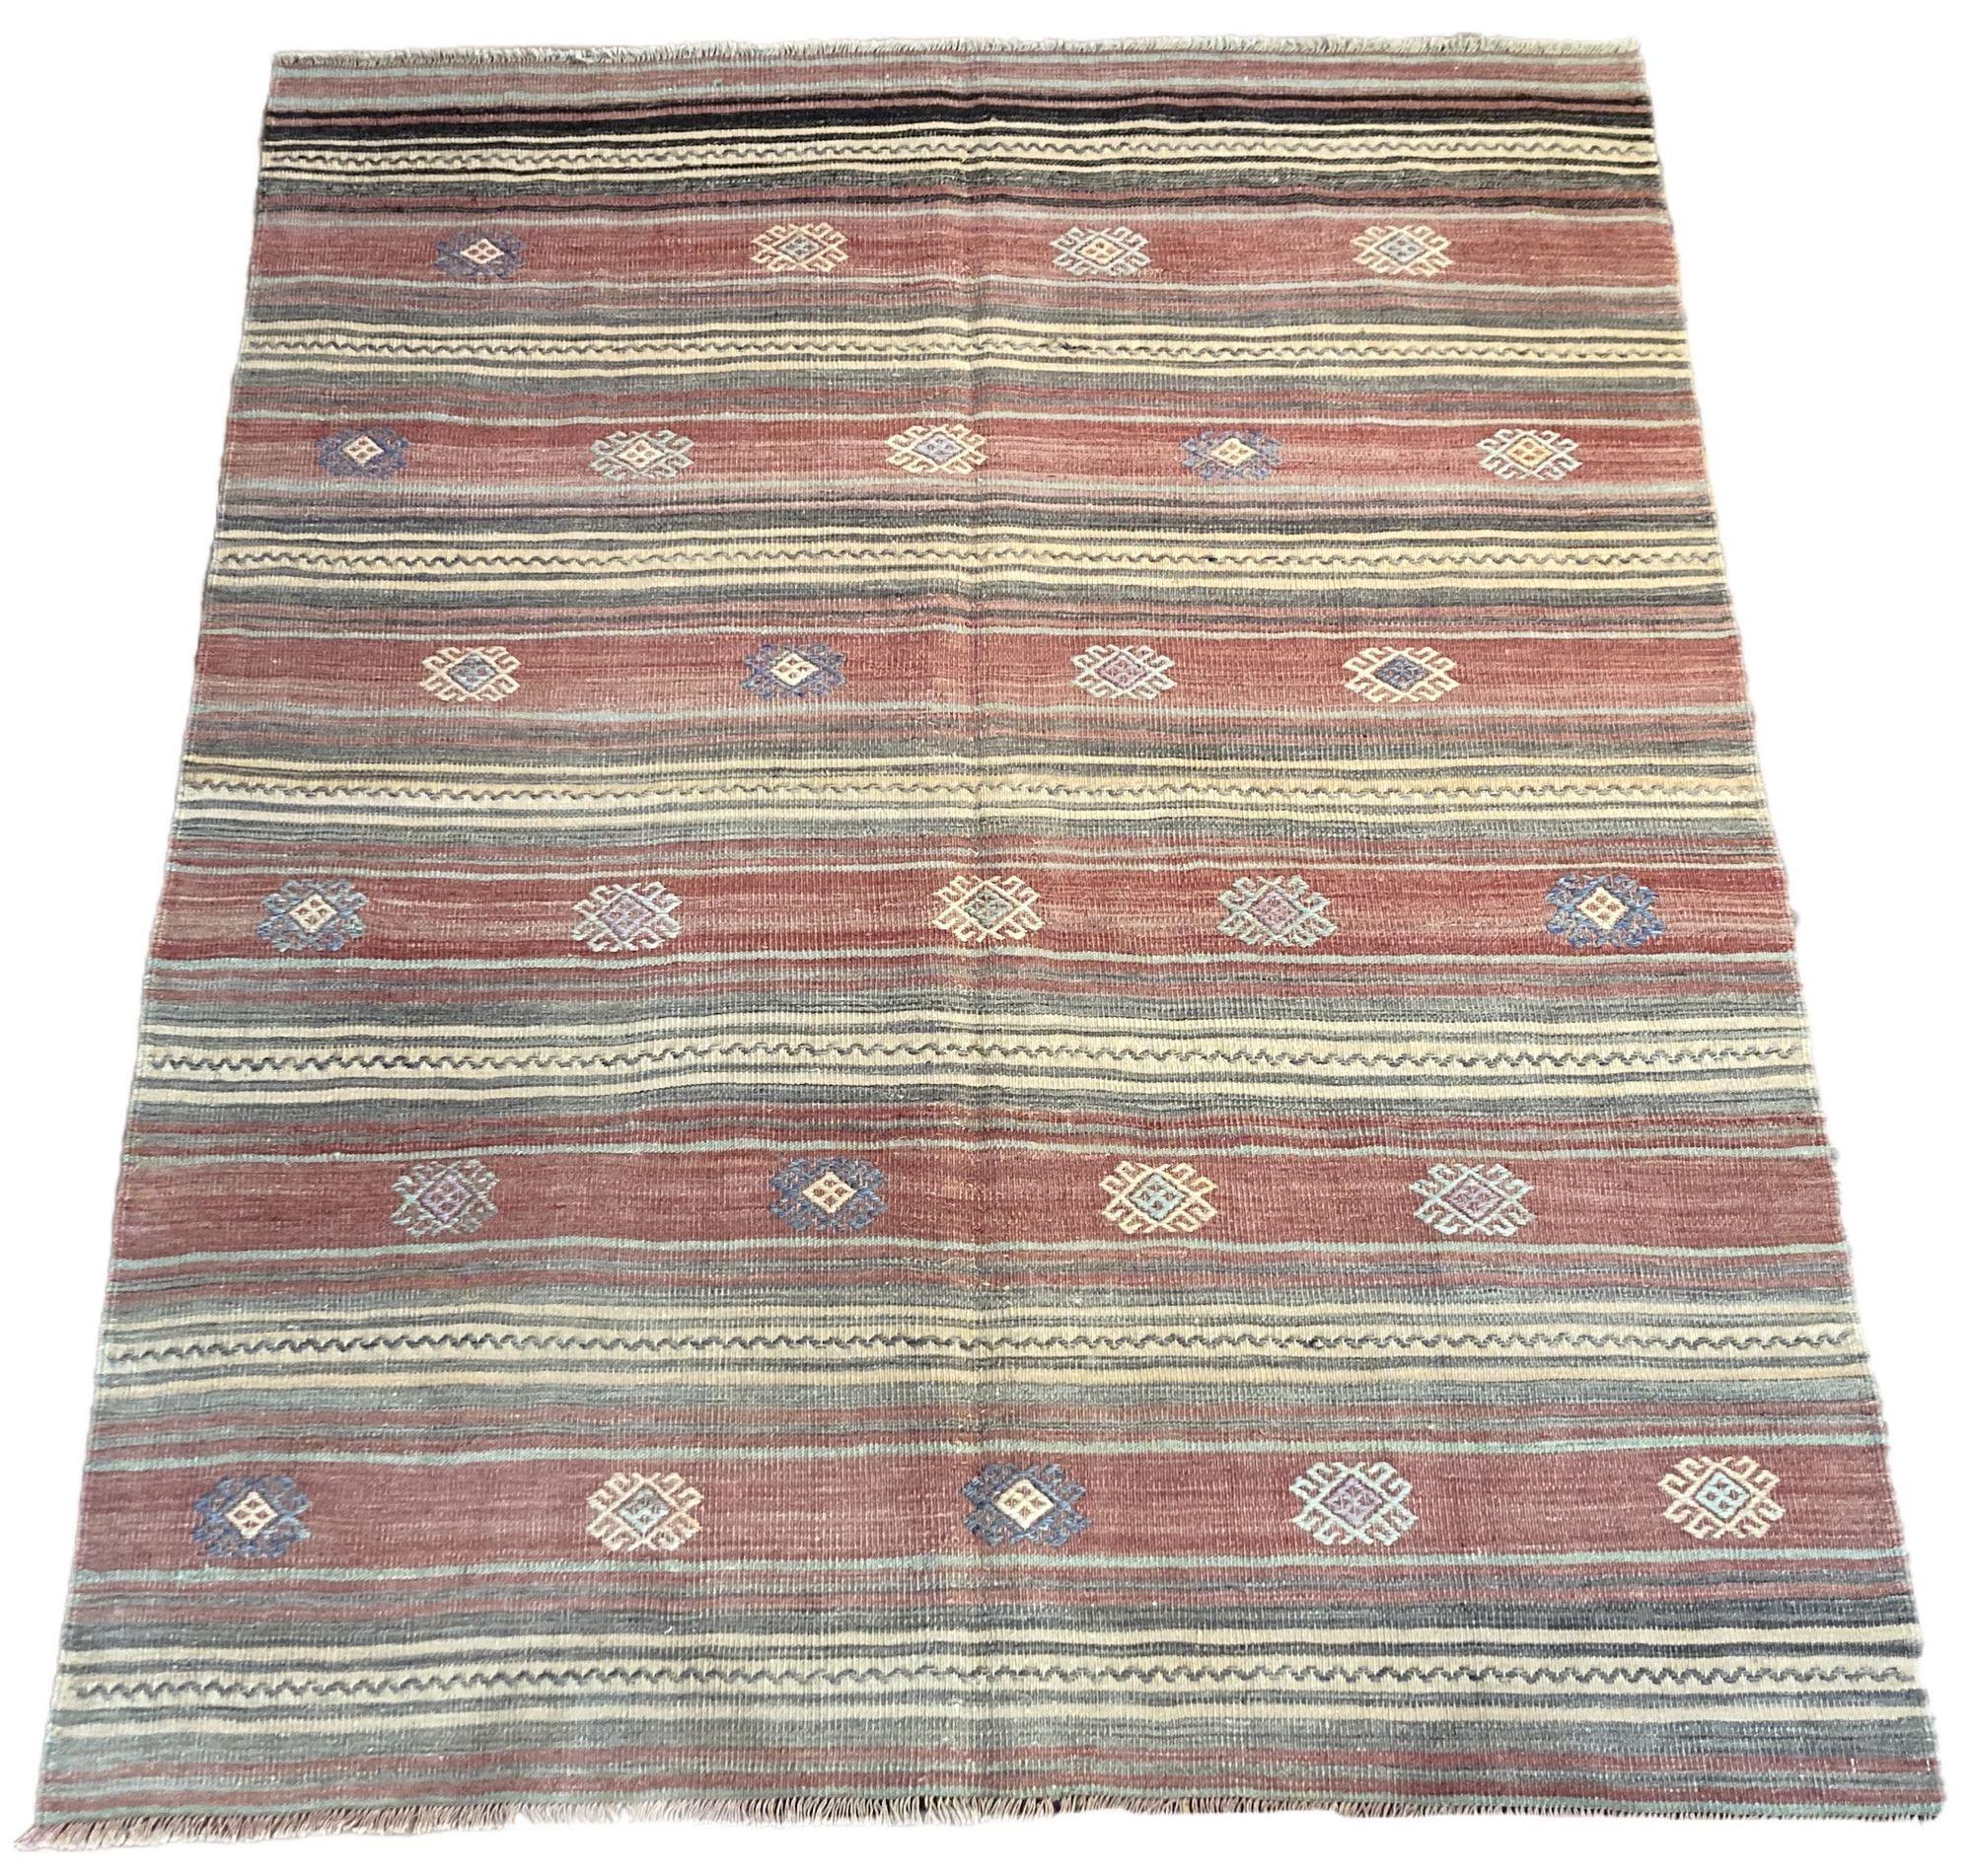 A beautiful vintage kilim, handwoven in central Turkey circa 1960 featuring a traditional multicoloured banded design in soft pinks and greys.
Size: 1.90m x 1.53m (6ft 3in x 5ft)
This kilim is in good condition with light, age related wear. The